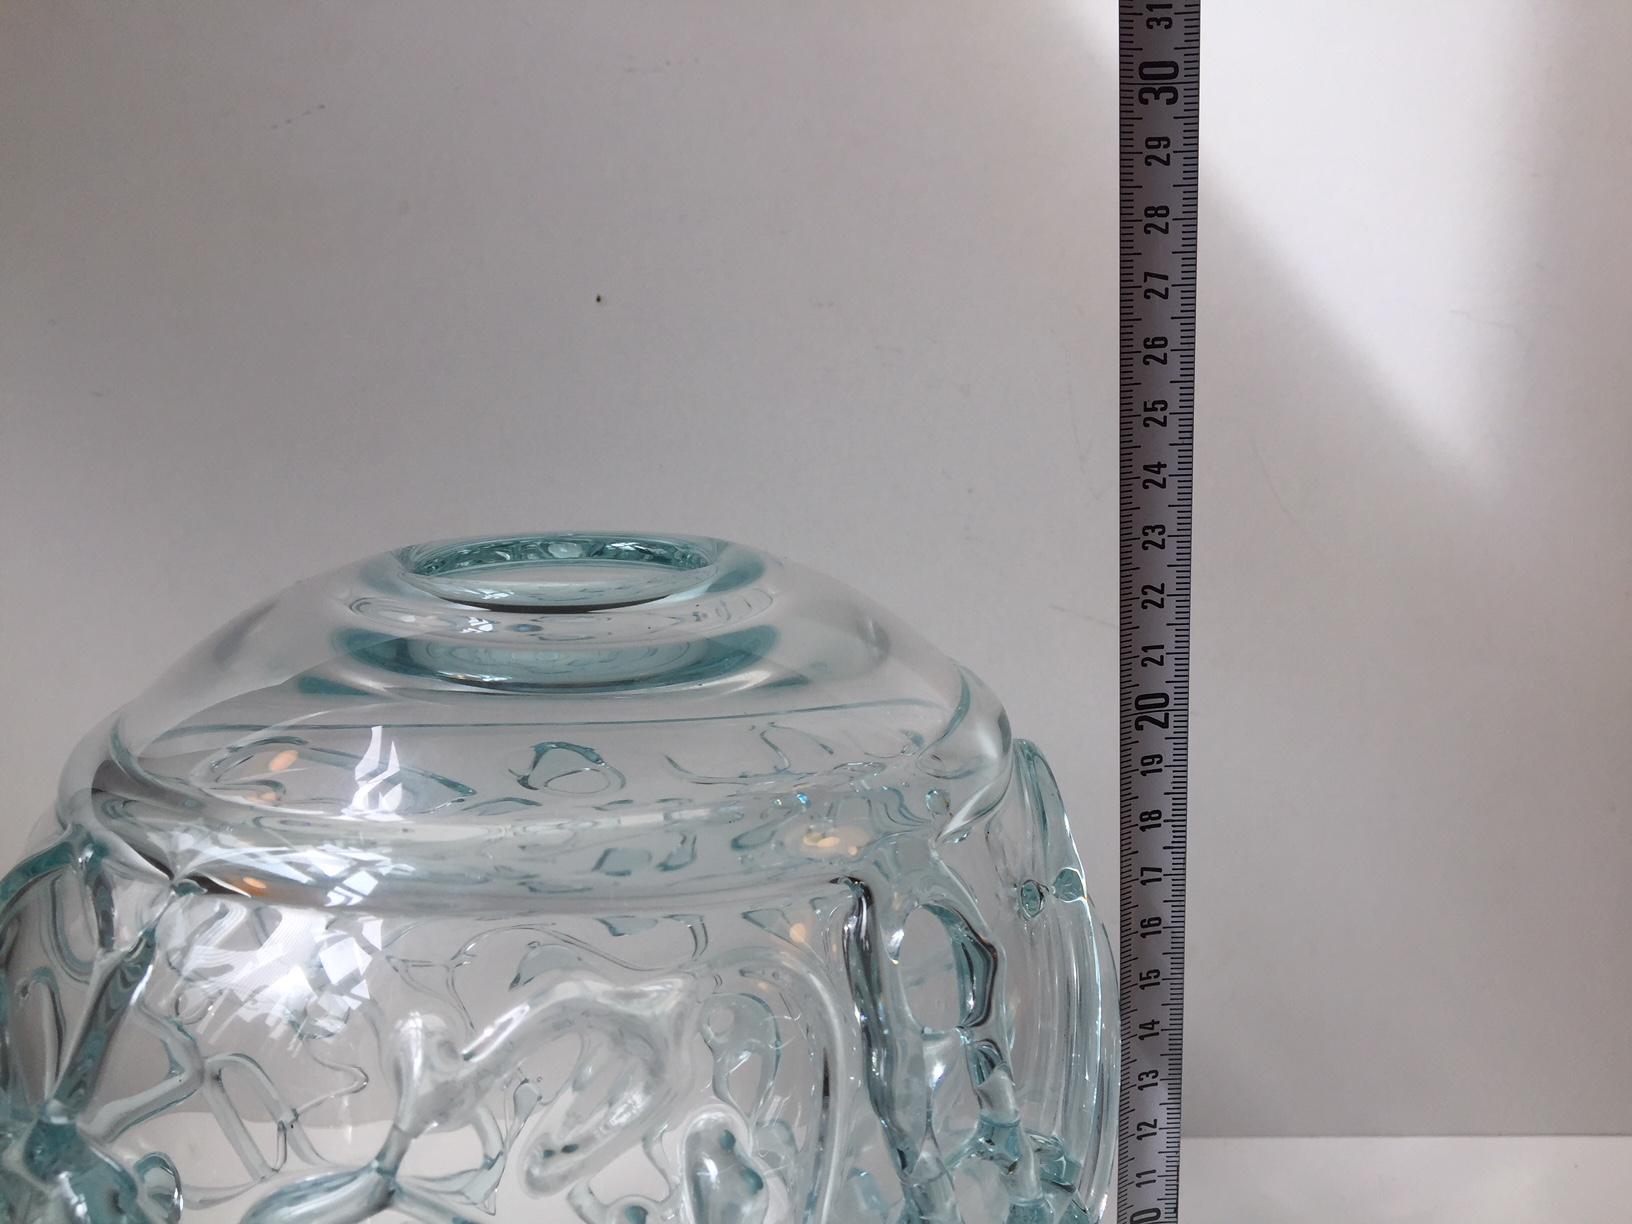 Unique Spherical and Abstract Glass Vase by Michael Bang for Holmegaard, Denmark 2